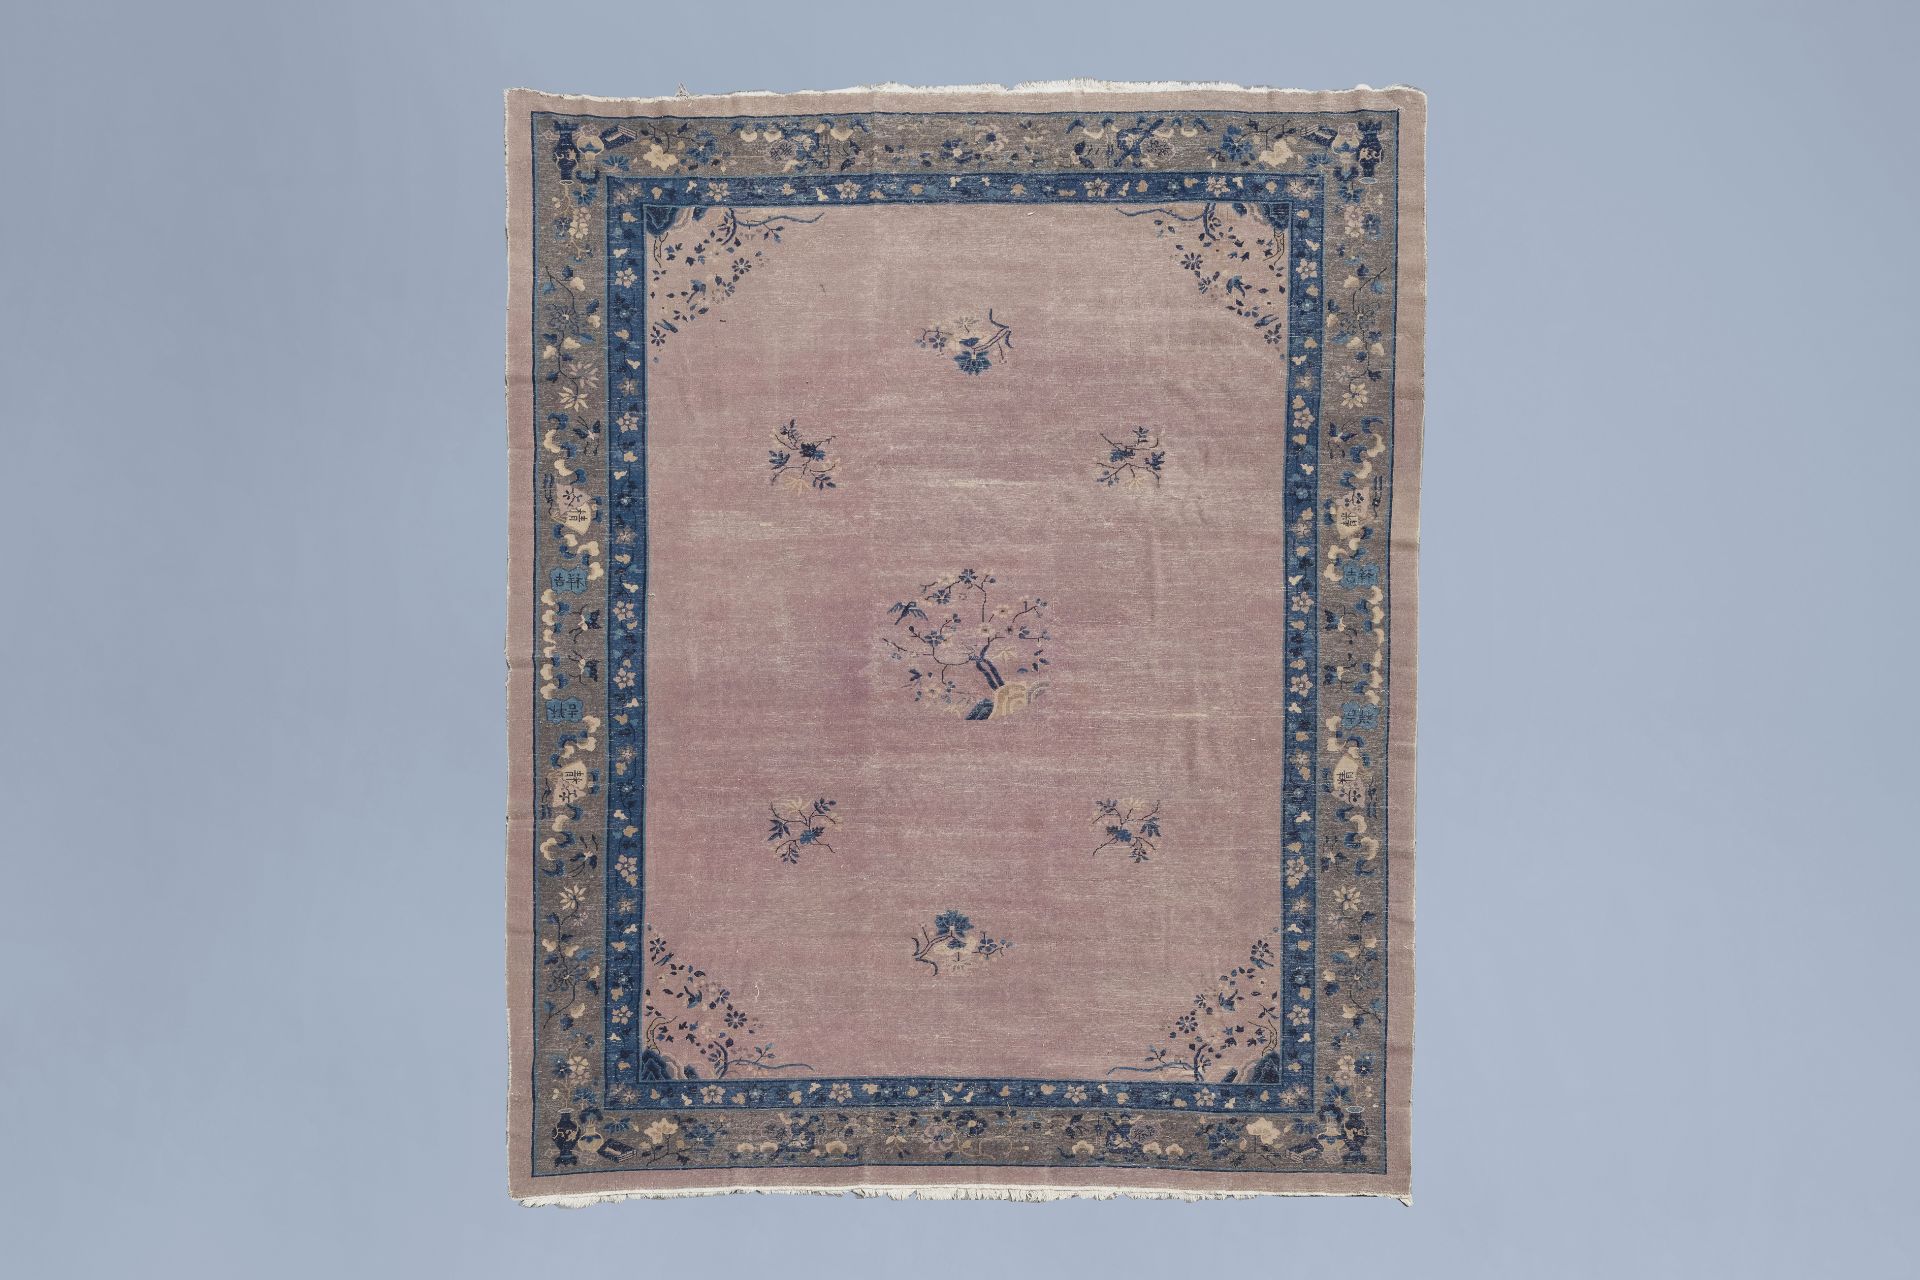 A Chinese 'Peking' rug with floral design, wool on cotton, first half of the 20th C. - Image 2 of 3